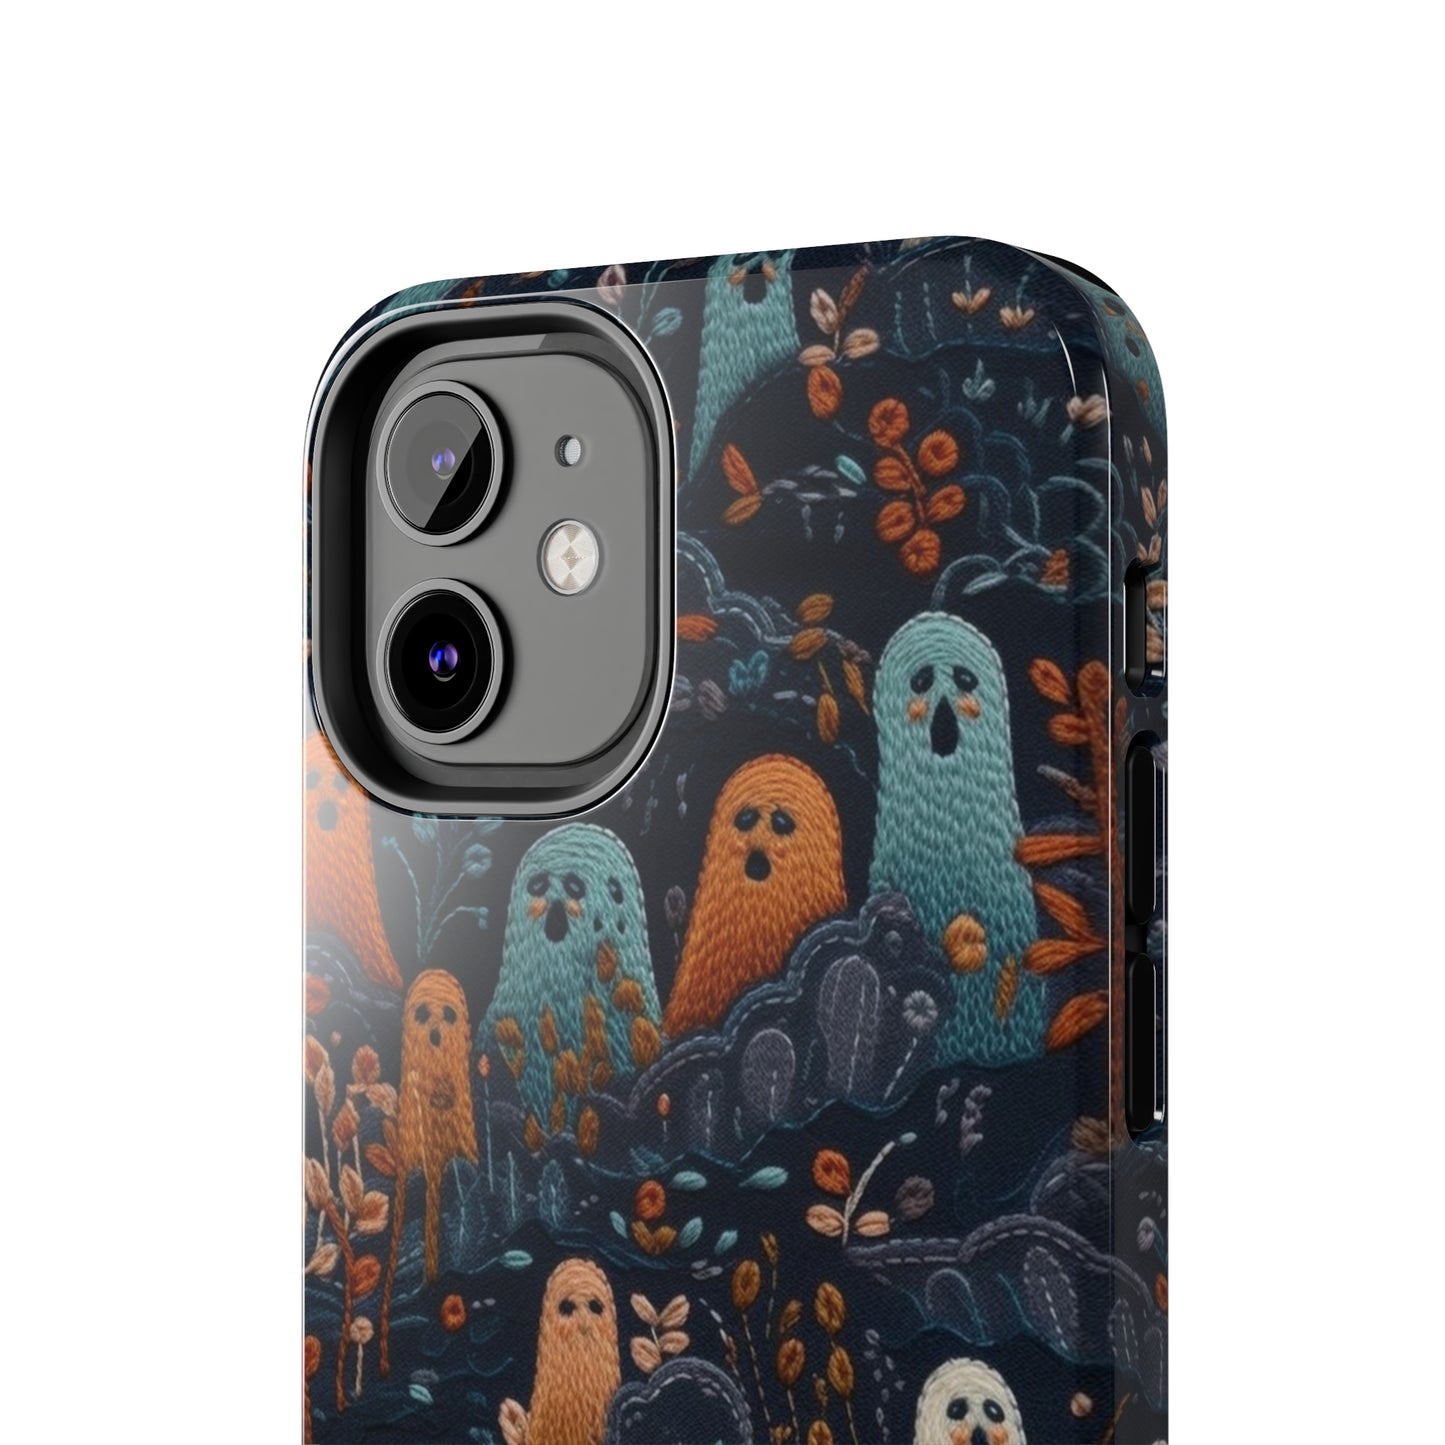 Ghosts in Garden iPhone Tough Phone Cases